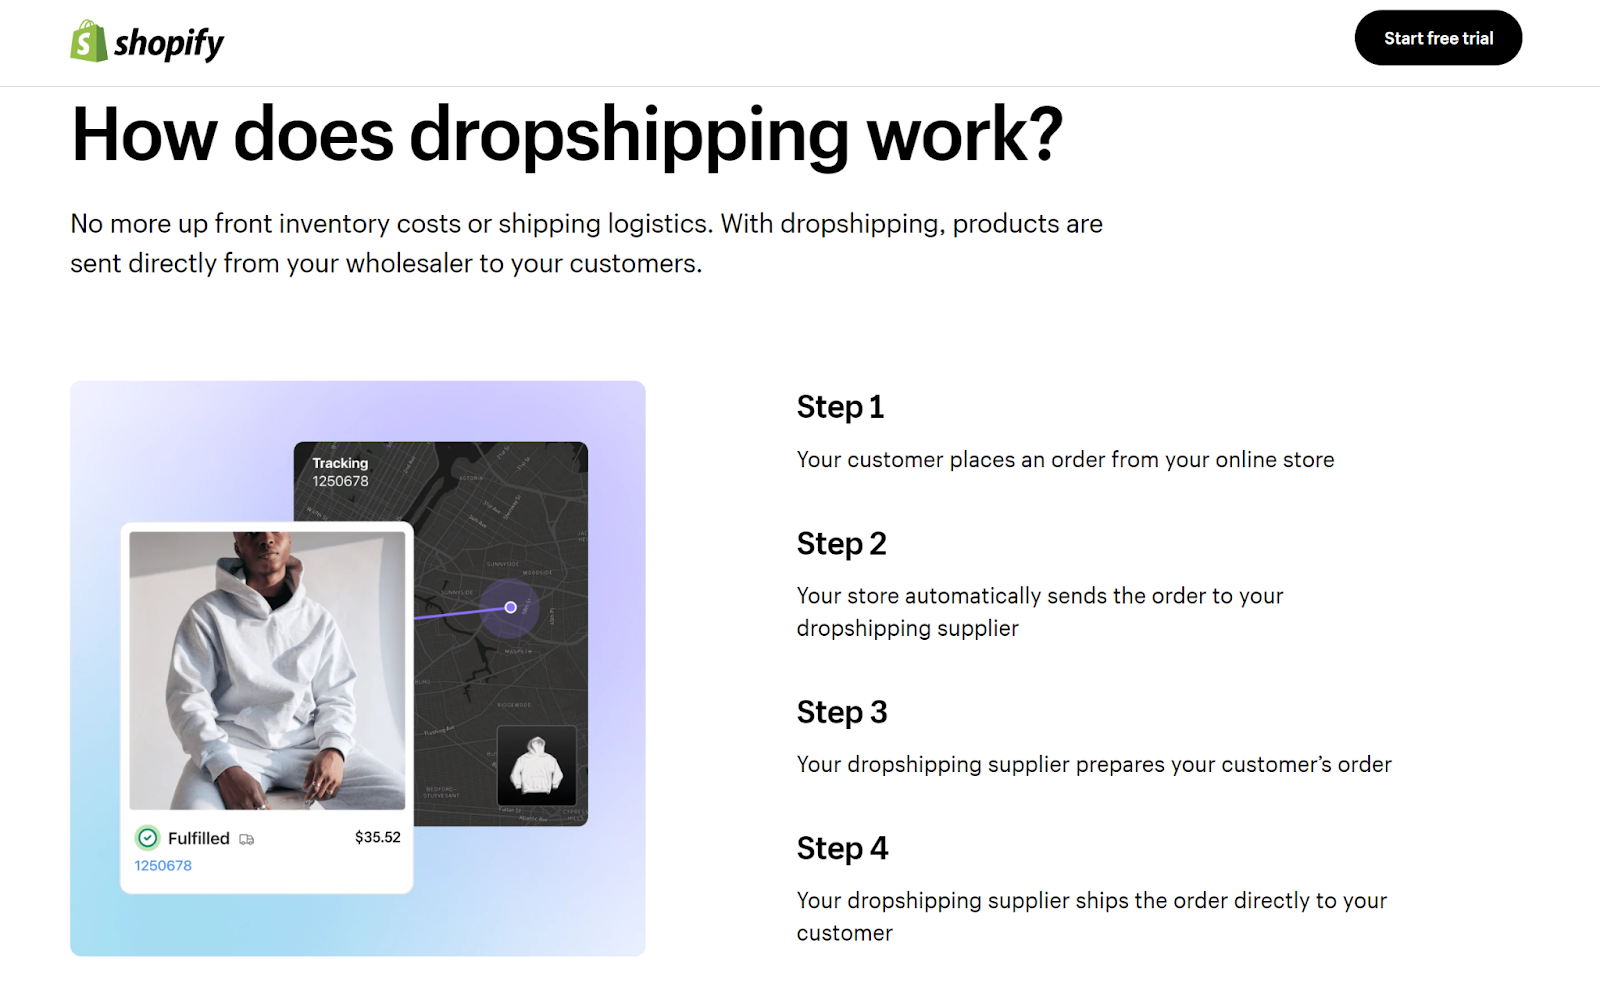 The picture shows an example of a dropshipping platform (Shopify) and describes how dropshipping works with an example of a specific product (hoodies)